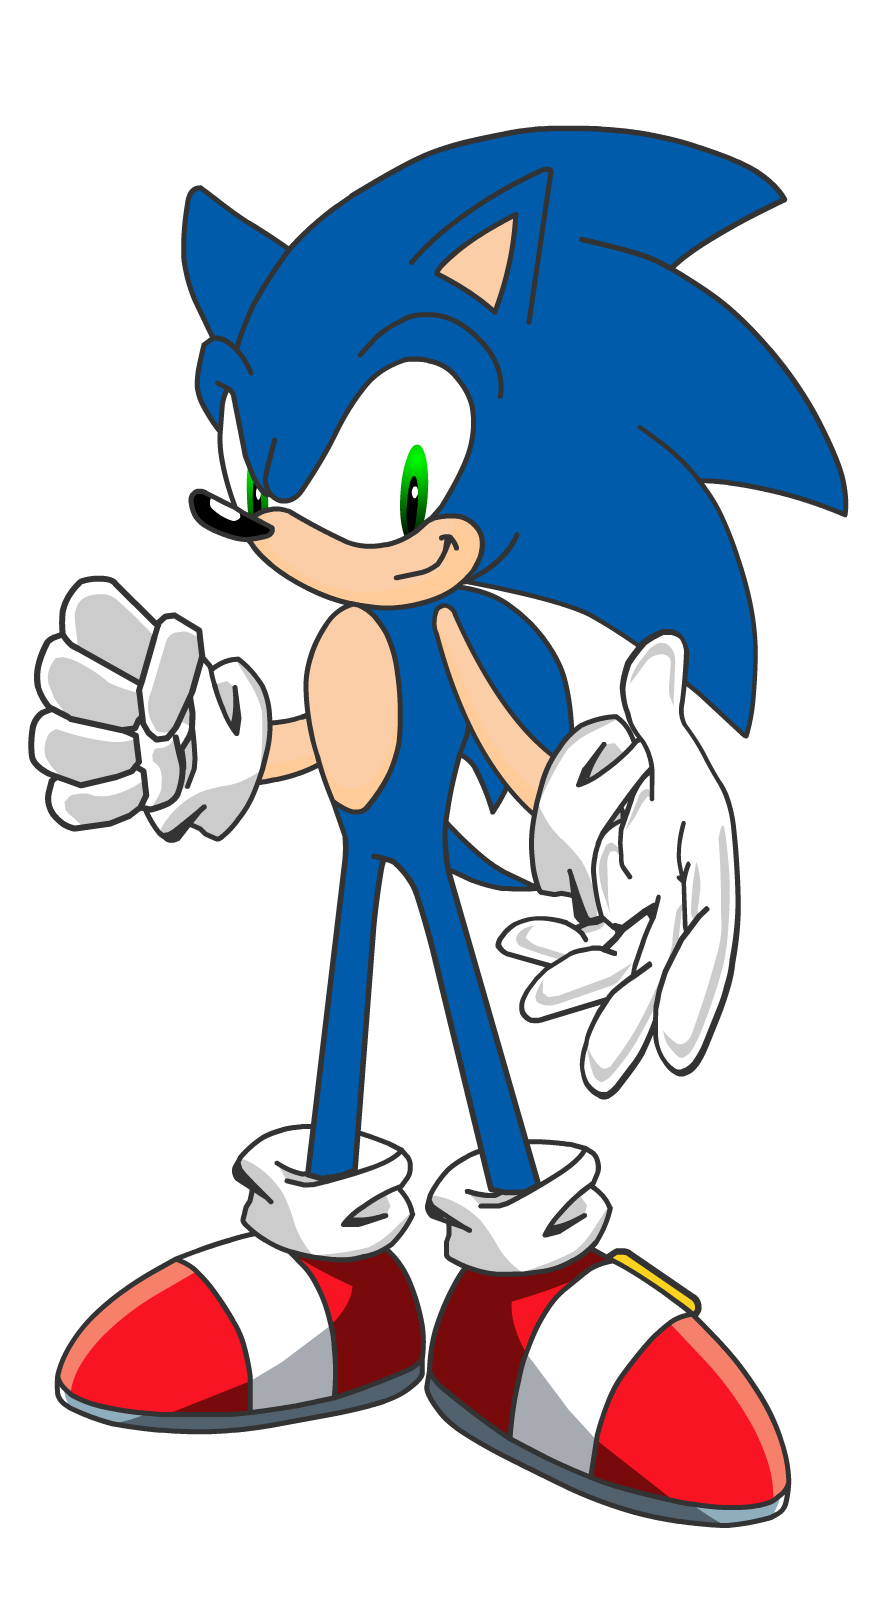 Sonic The Hedgehog Clipart at GetDrawings.com.